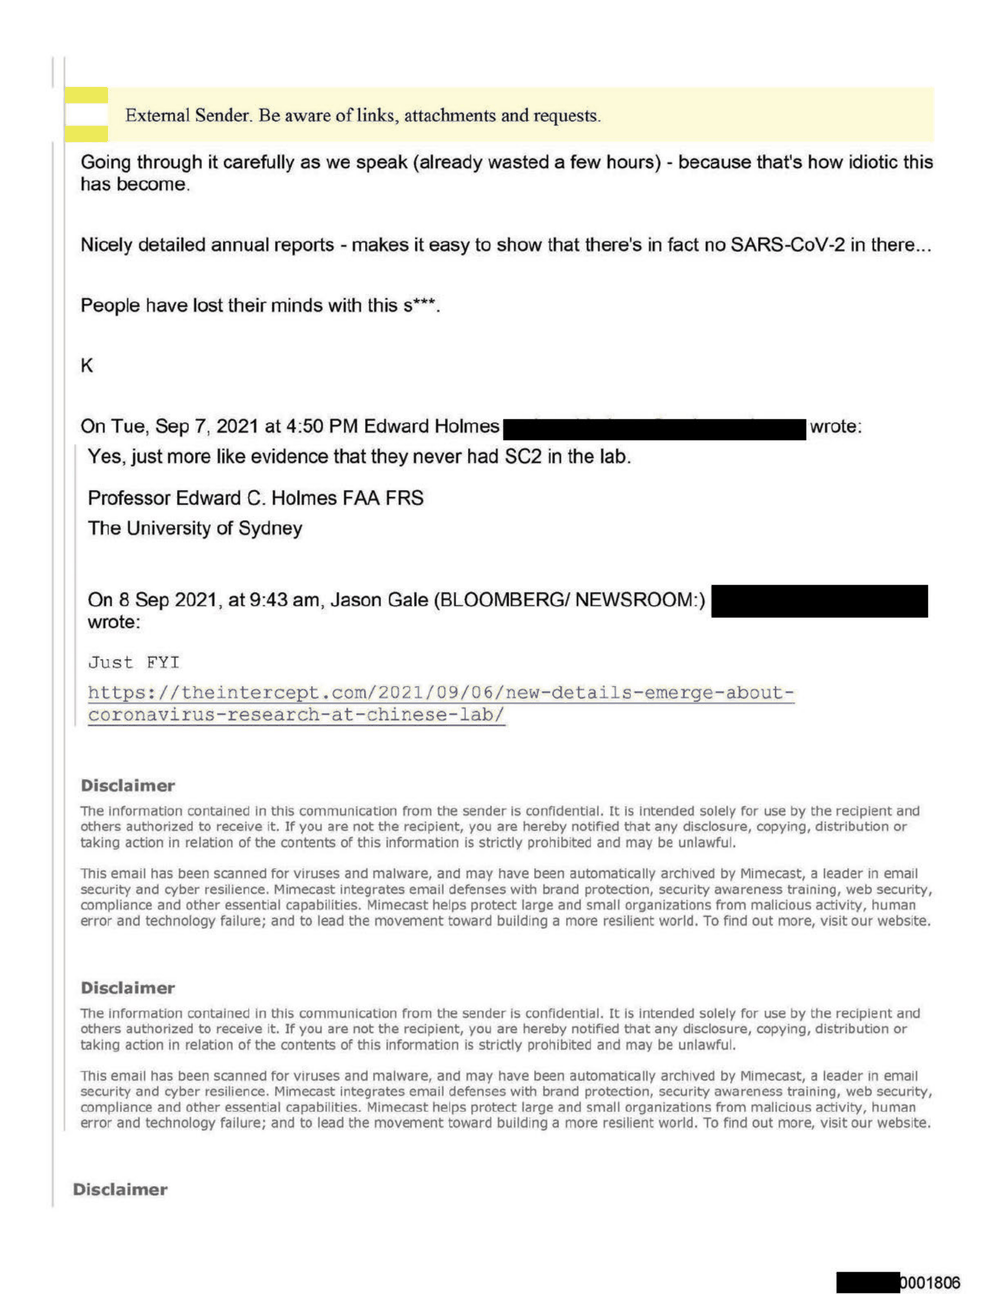 Page 33 from David Morens NIH Emails Redacted